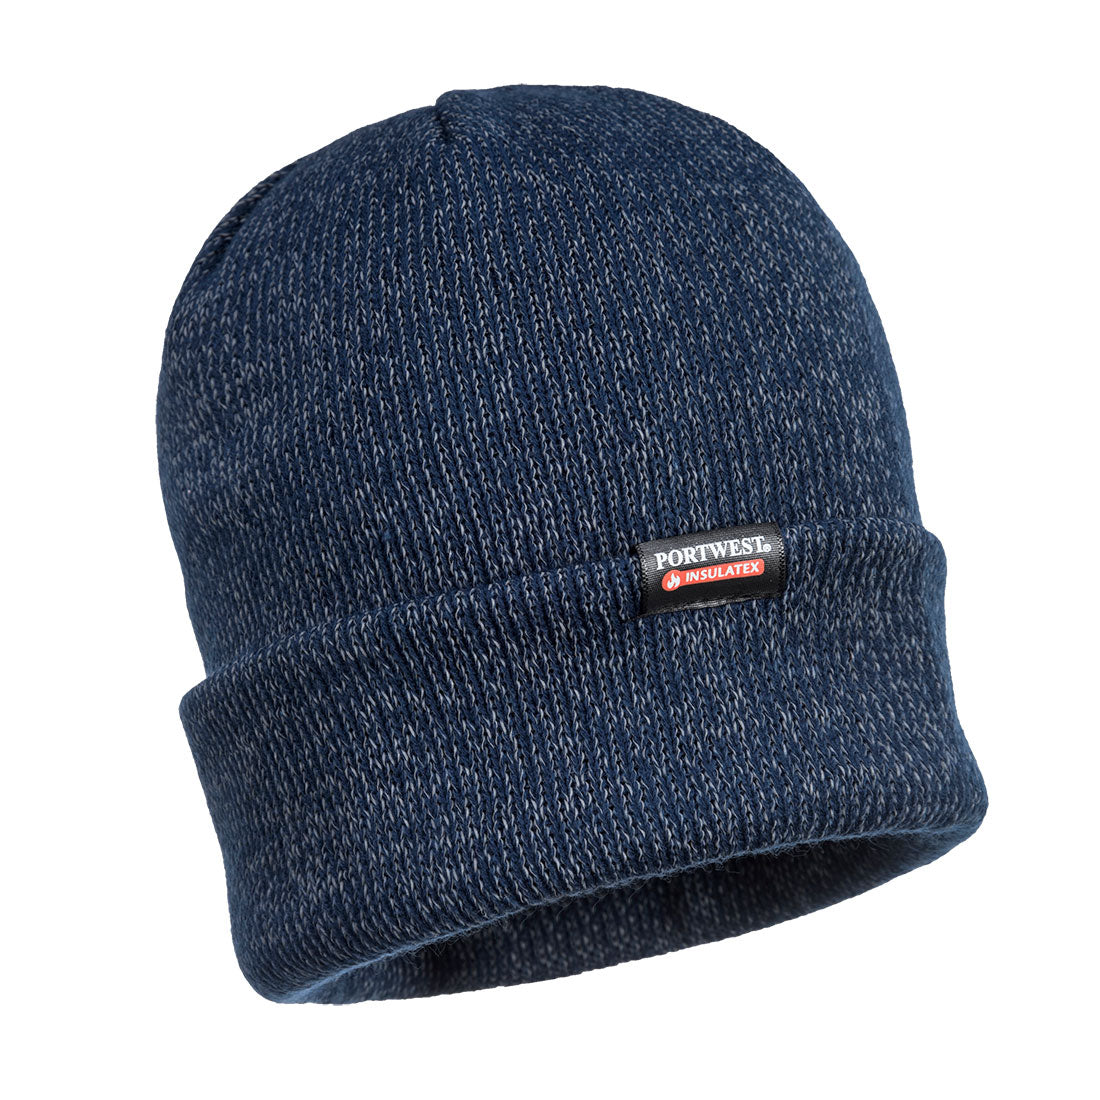 Reflective Knit Beanie, Insulatex Lined Navy - B026